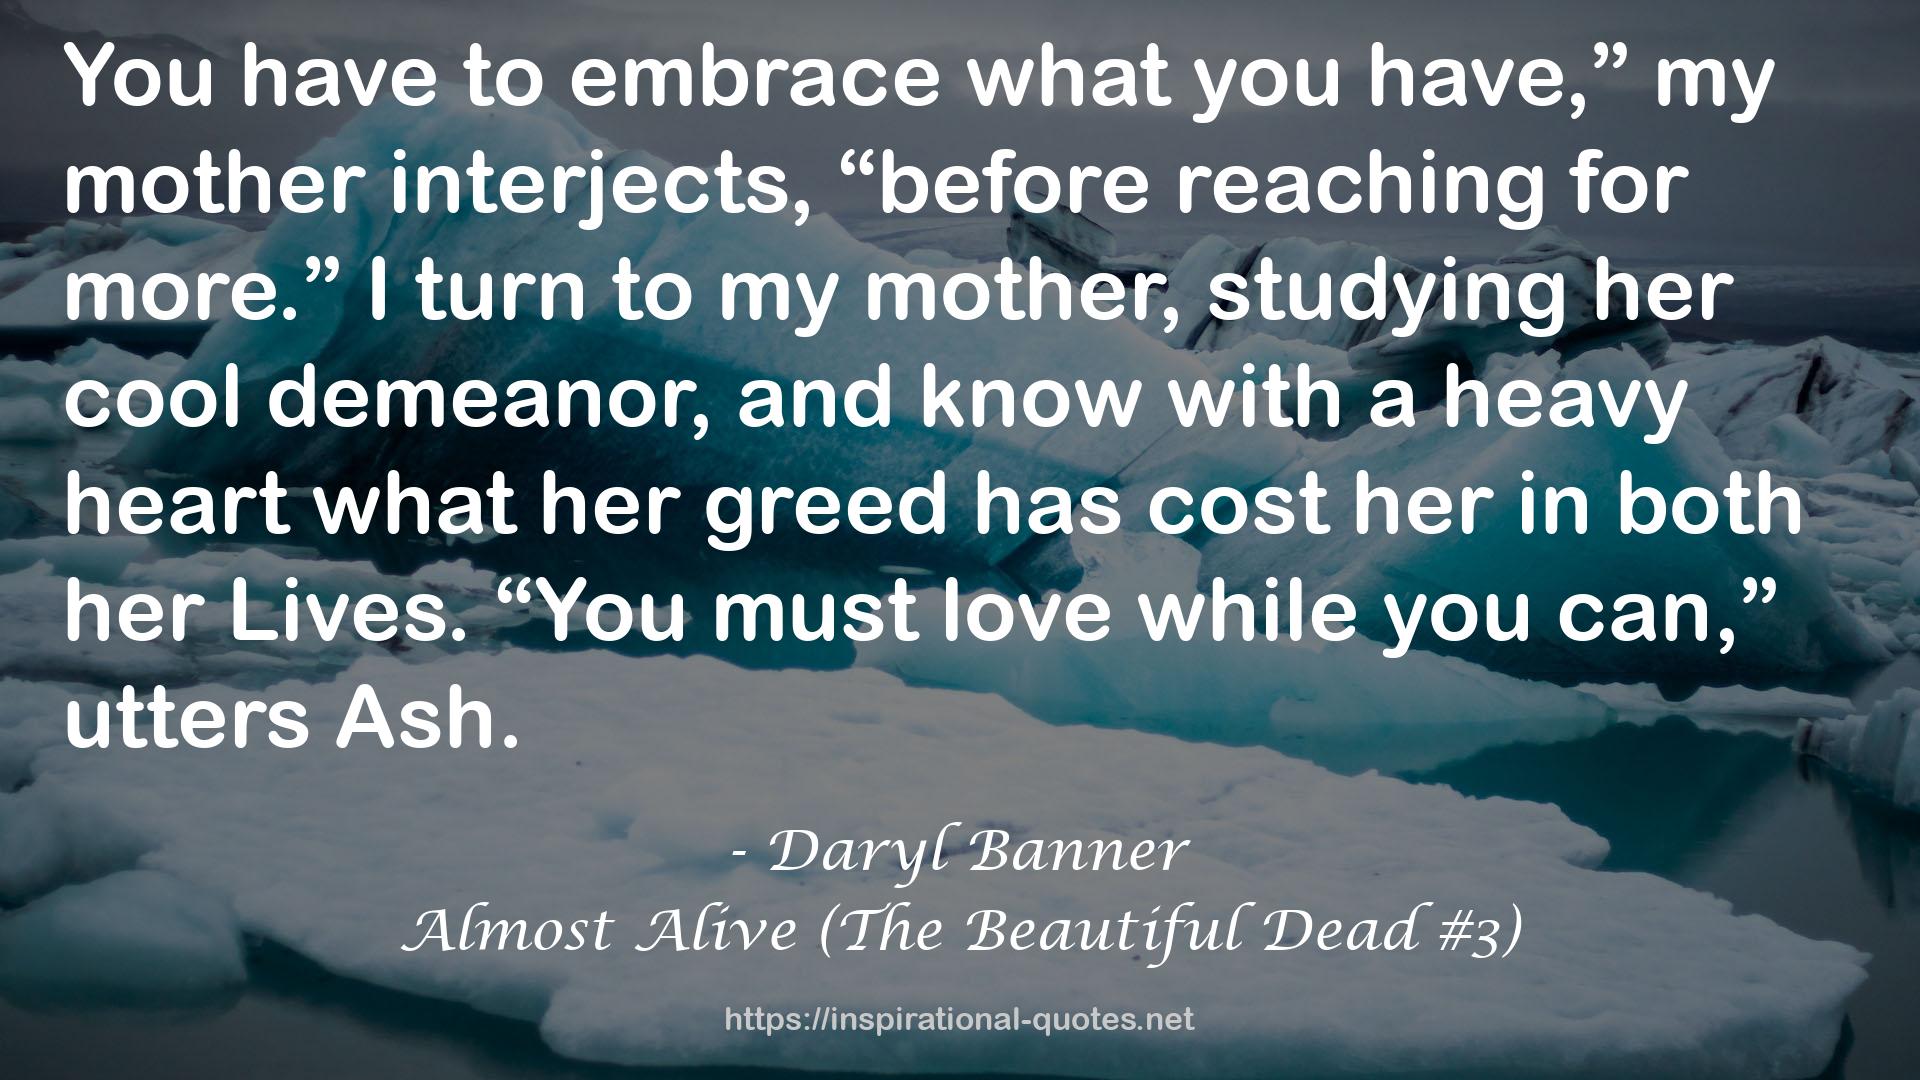 Almost Alive (The Beautiful Dead #3) QUOTES